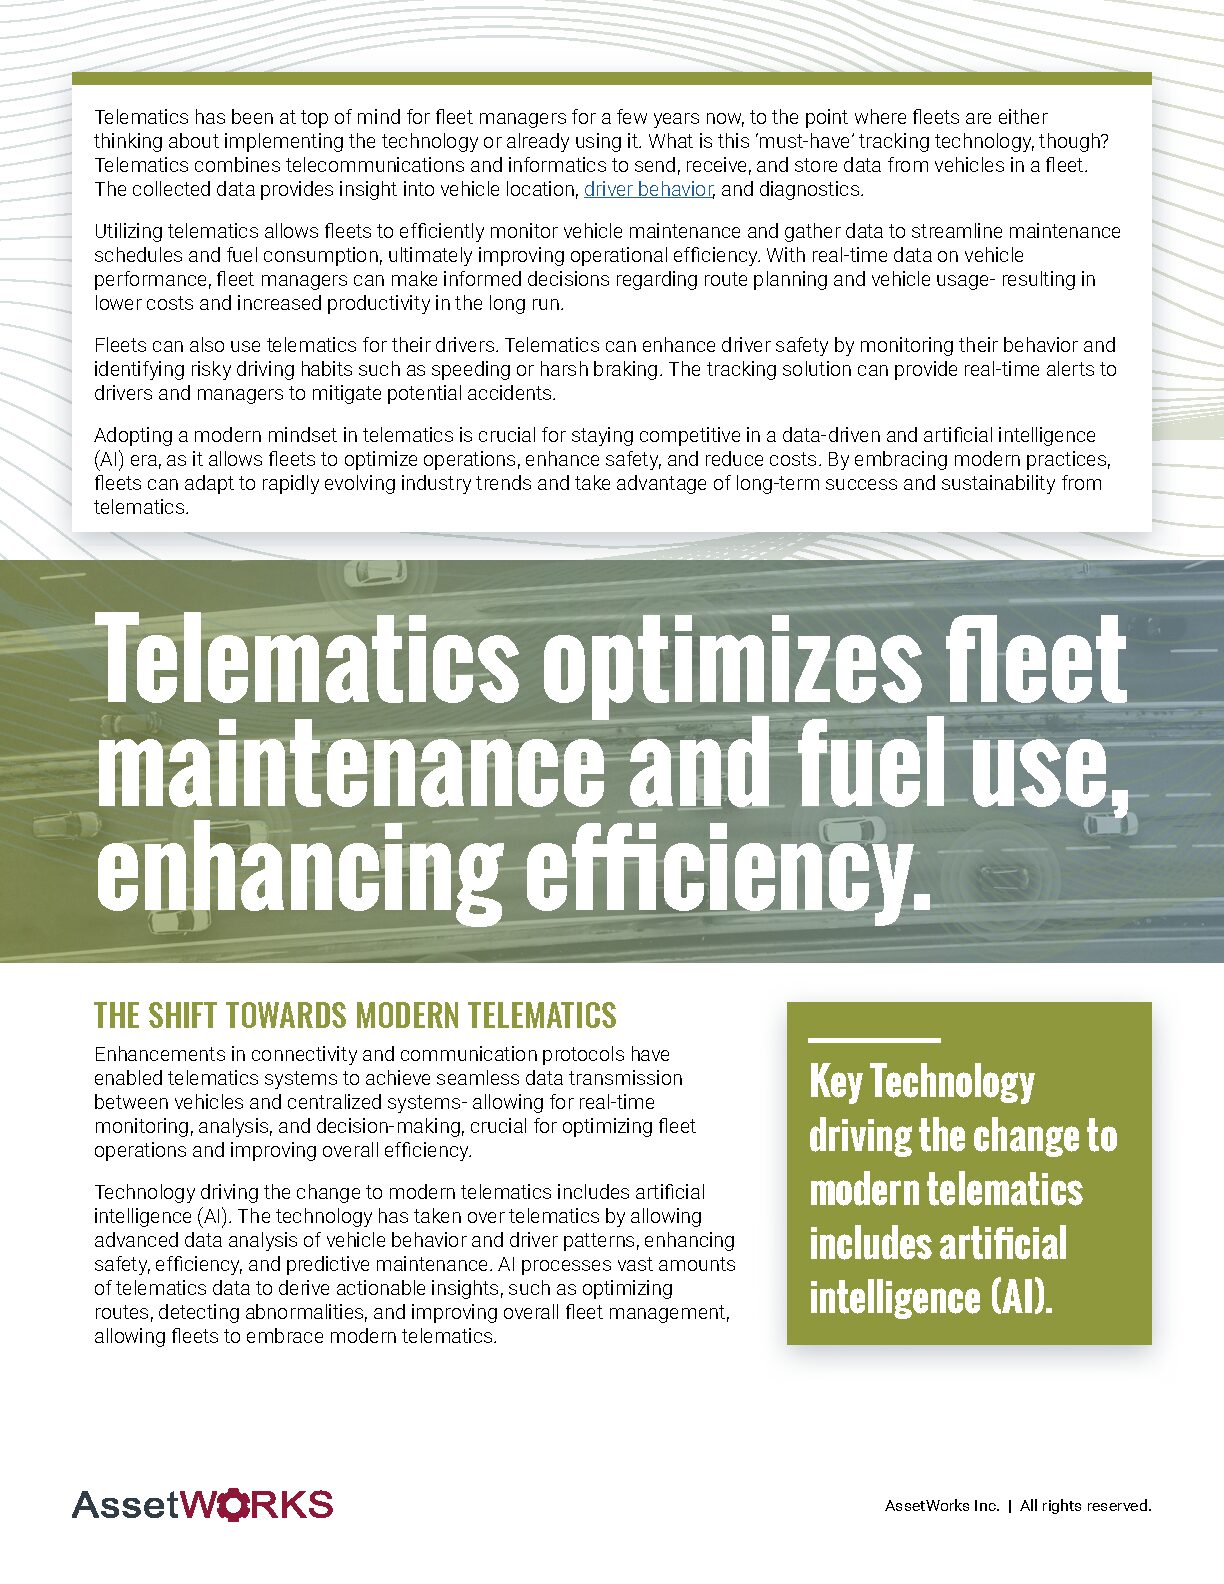 How to Use Telematics Data to Modernize Fleet Management Practices_Page_2